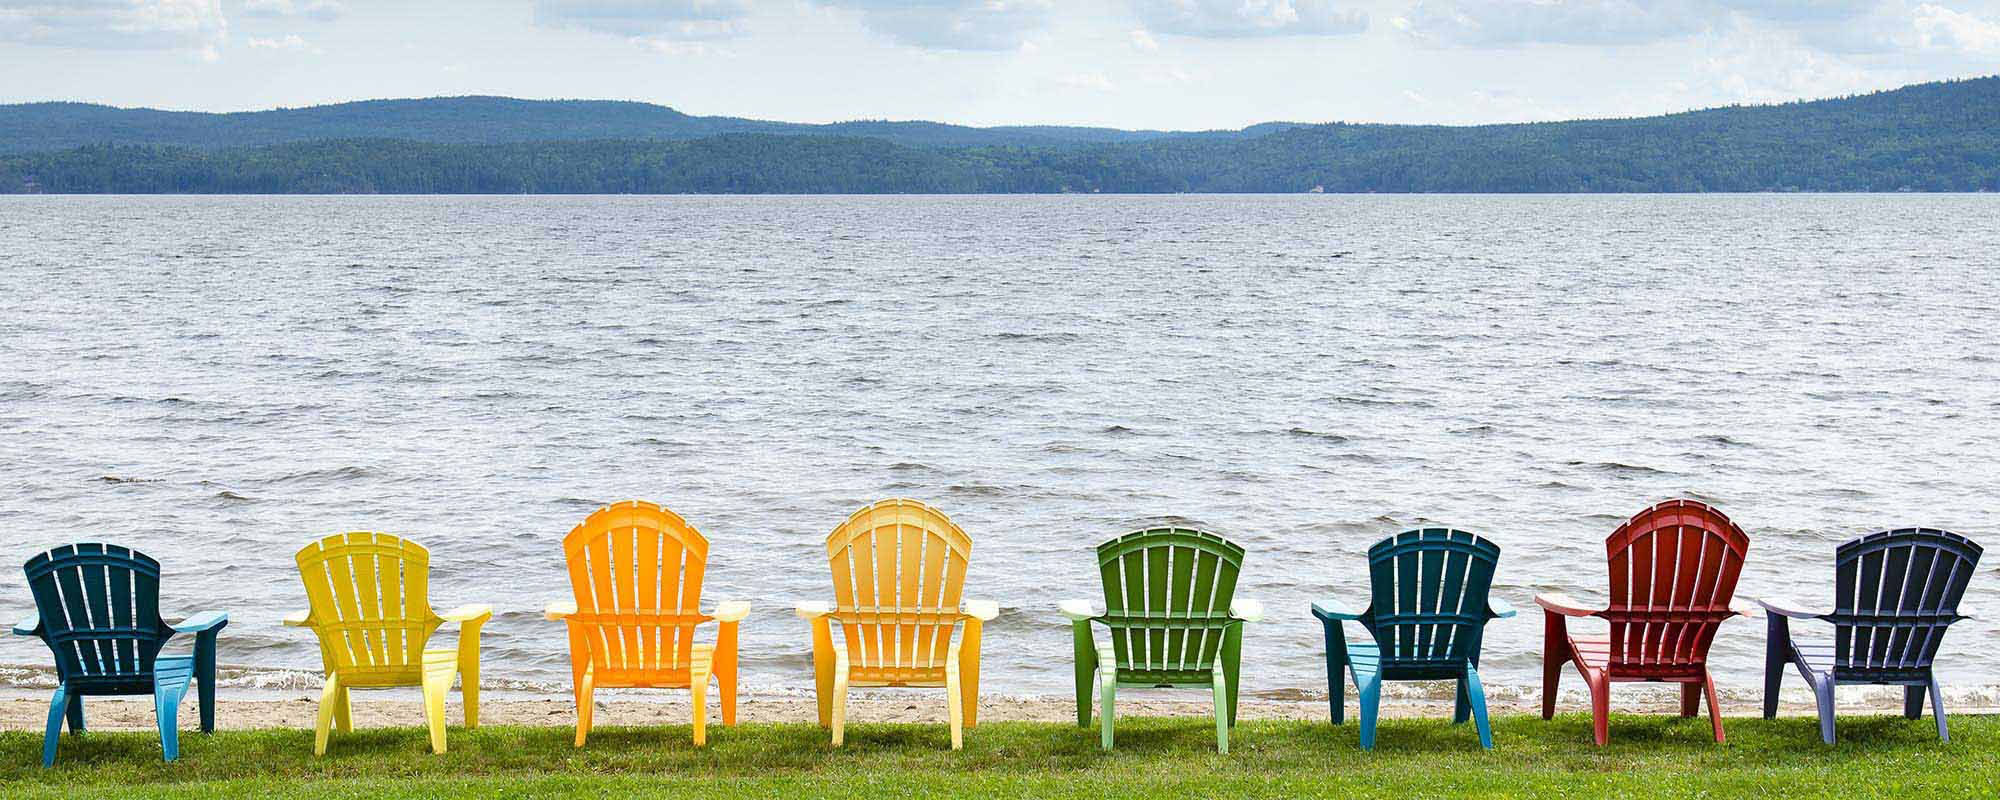 multicolored chairs lined up beside a body of water